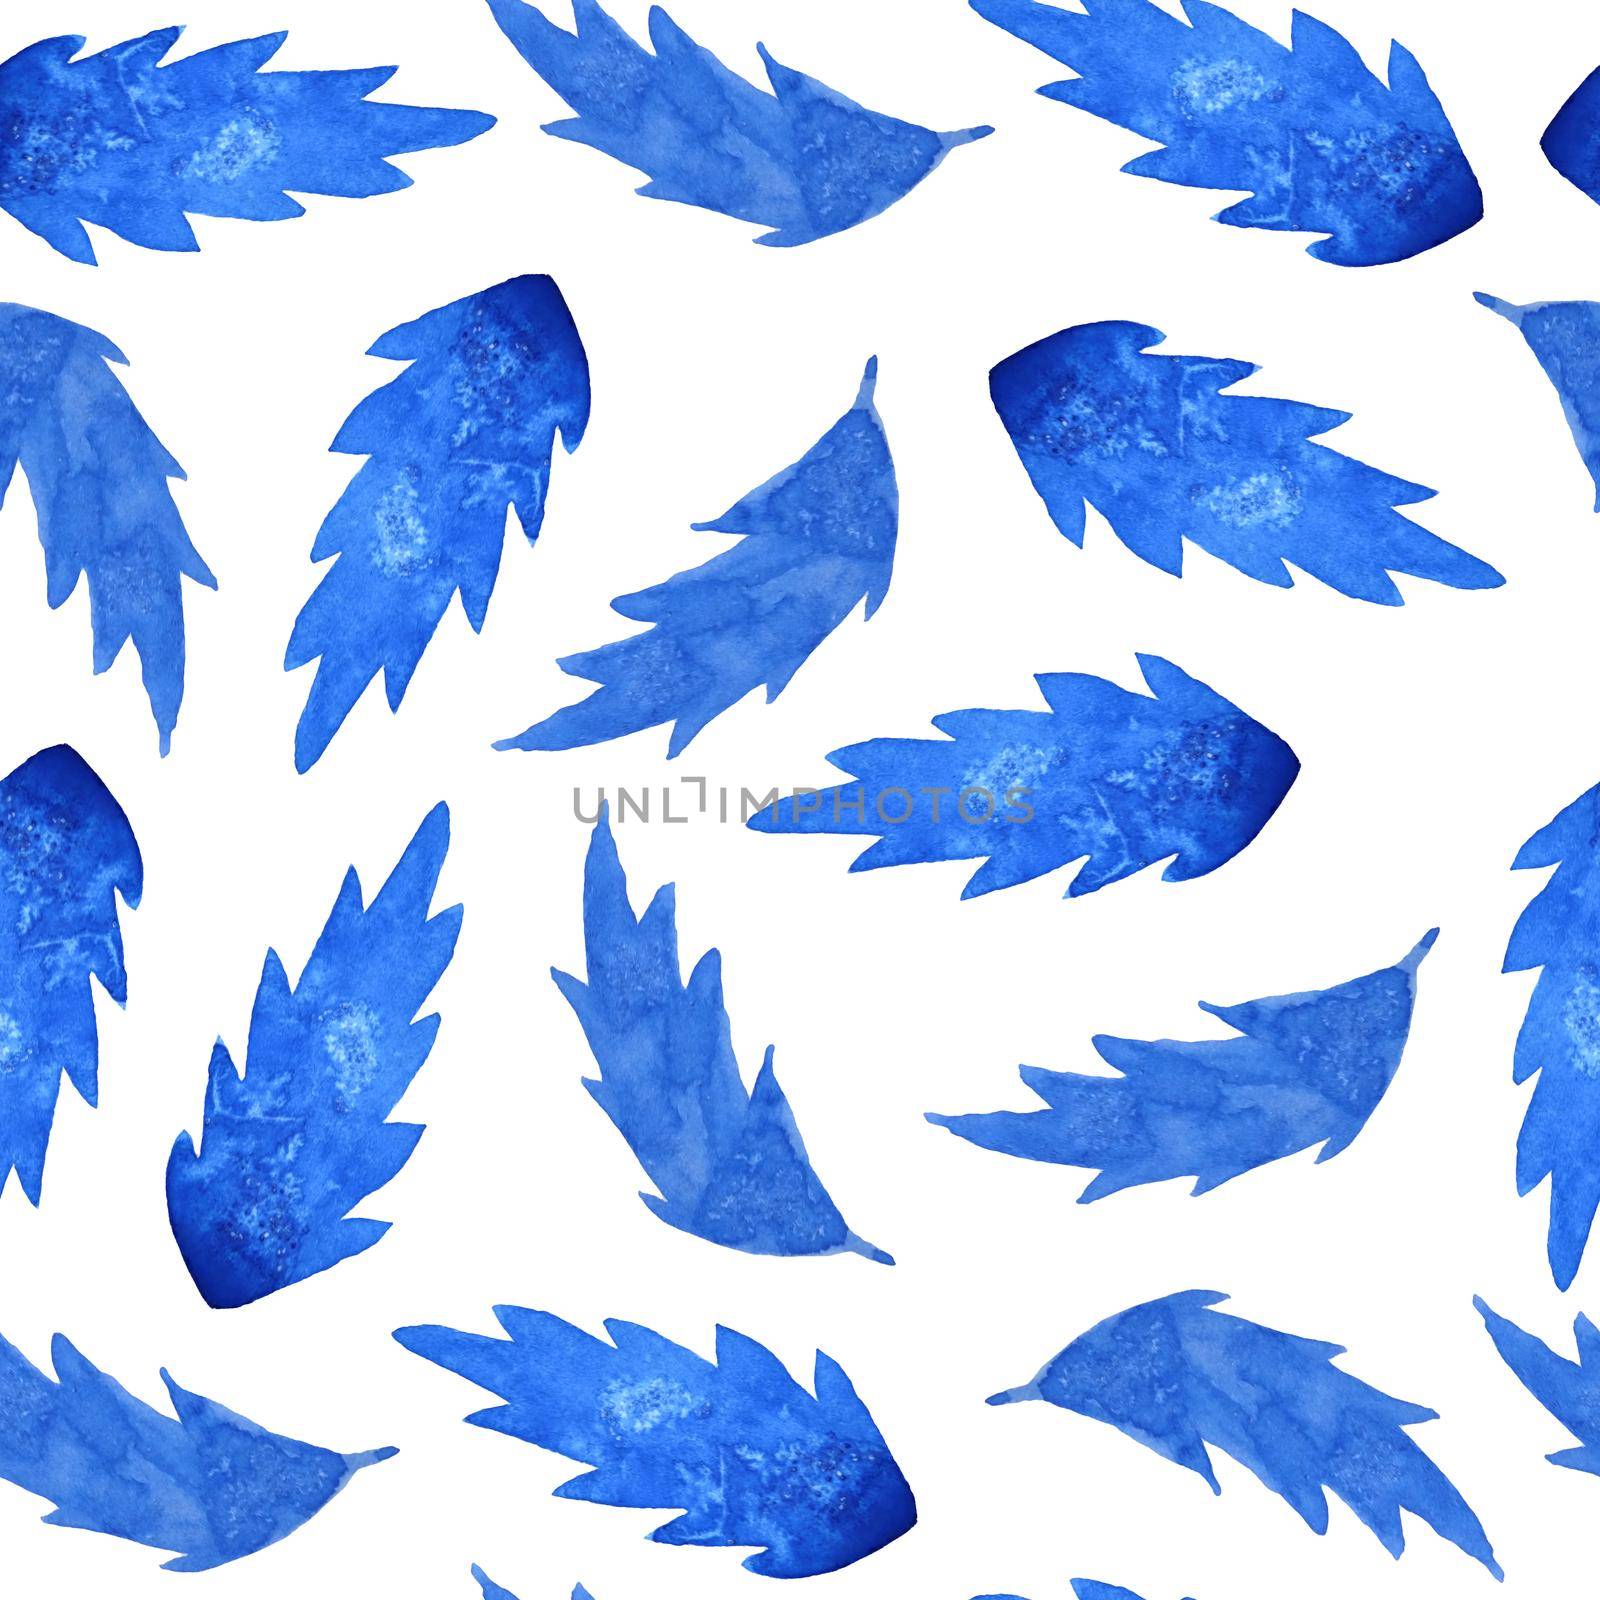 seamless watercolor hand drawn pattern with electric blue winter rowan leaves illustration. Modern floral botanical simple minimalist design for elegant christmas new year celebration decoration textile. by Lagmar